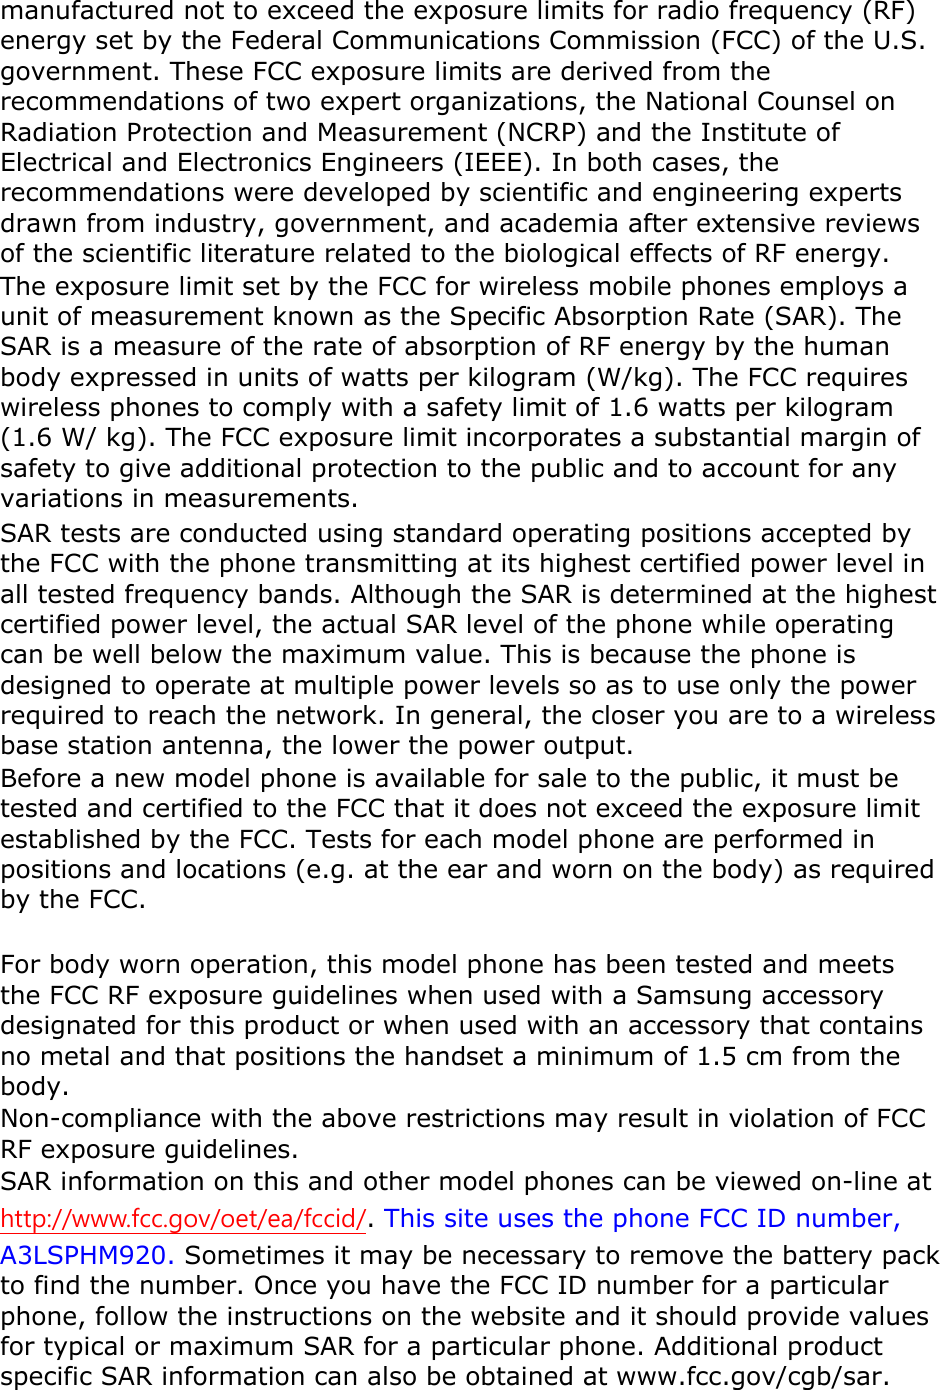 manufactured not to exceed the exposure limits for radio frequency (RF) energy set by the Federal Communications Commission (FCC) of the U.S. government. These FCC exposure limits are derived from the recommendations of two expert organizations, the National Counsel on Radiation Protection and Measurement (NCRP) and the Institute of Electrical and Electronics Engineers (IEEE). In both cases, the recommendations were developed by scientific and engineering experts drawn from industry, government, and academia after extensive reviews of the scientific literature related to the biological effects of RF energy. The exposure limit set by the FCC for wireless mobile phones employs a unit of measurement known as the Specific Absorption Rate (SAR). The SAR is a measure of the rate of absorption of RF energy by the human body expressed in units of watts per kilogram (W/kg). The FCC requires wireless phones to comply with a safety limit of 1.6 watts per kilogram (1.6 W/ kg). The FCC exposure limit incorporates a substantial margin of safety to give additional protection to the public and to account for any variations in measurements. SAR tests are conducted using standard operating positions accepted by the FCC with the phone transmitting at its highest certified power level in all tested frequency bands. Although the SAR is determined at the highest certified power level, the actual SAR level of the phone while operating can be well below the maximum value. This is because the phone is designed to operate at multiple power levels so as to use only the power required to reach the network. In general, the closer you are to a wireless base station antenna, the lower the power output. Before a new model phone is available for sale to the public, it must be tested and certified to the FCC that it does not exceed the exposure limit established by the FCC. Tests for each model phone are performed in positions and locations (e.g. at the ear and worn on the body) as required by the FCC.      For body worn operation, this model phone has been tested and meets the FCC RF exposure guidelines when used with a Samsung accessory designated for this product or when used with an accessory that contains no metal and that positions the handset a minimum of 1.5 cm from the body.  Non-compliance with the above restrictions may result in violation of FCC RF exposure guidelines. SAR information on this and other model phones can be viewed on-line at http://www.fcc.gov/oet/ea/fccid/. This site uses the phone FCC ID number, A3LSPHM920. Sometimes it may be necessary to remove the battery pack to find the number. Once you have the FCC ID number for a particular phone, follow the instructions on the website and it should provide values for typical or maximum SAR for a particular phone. Additional product specific SAR information can also be obtained at www.fcc.gov/cgb/sar. 